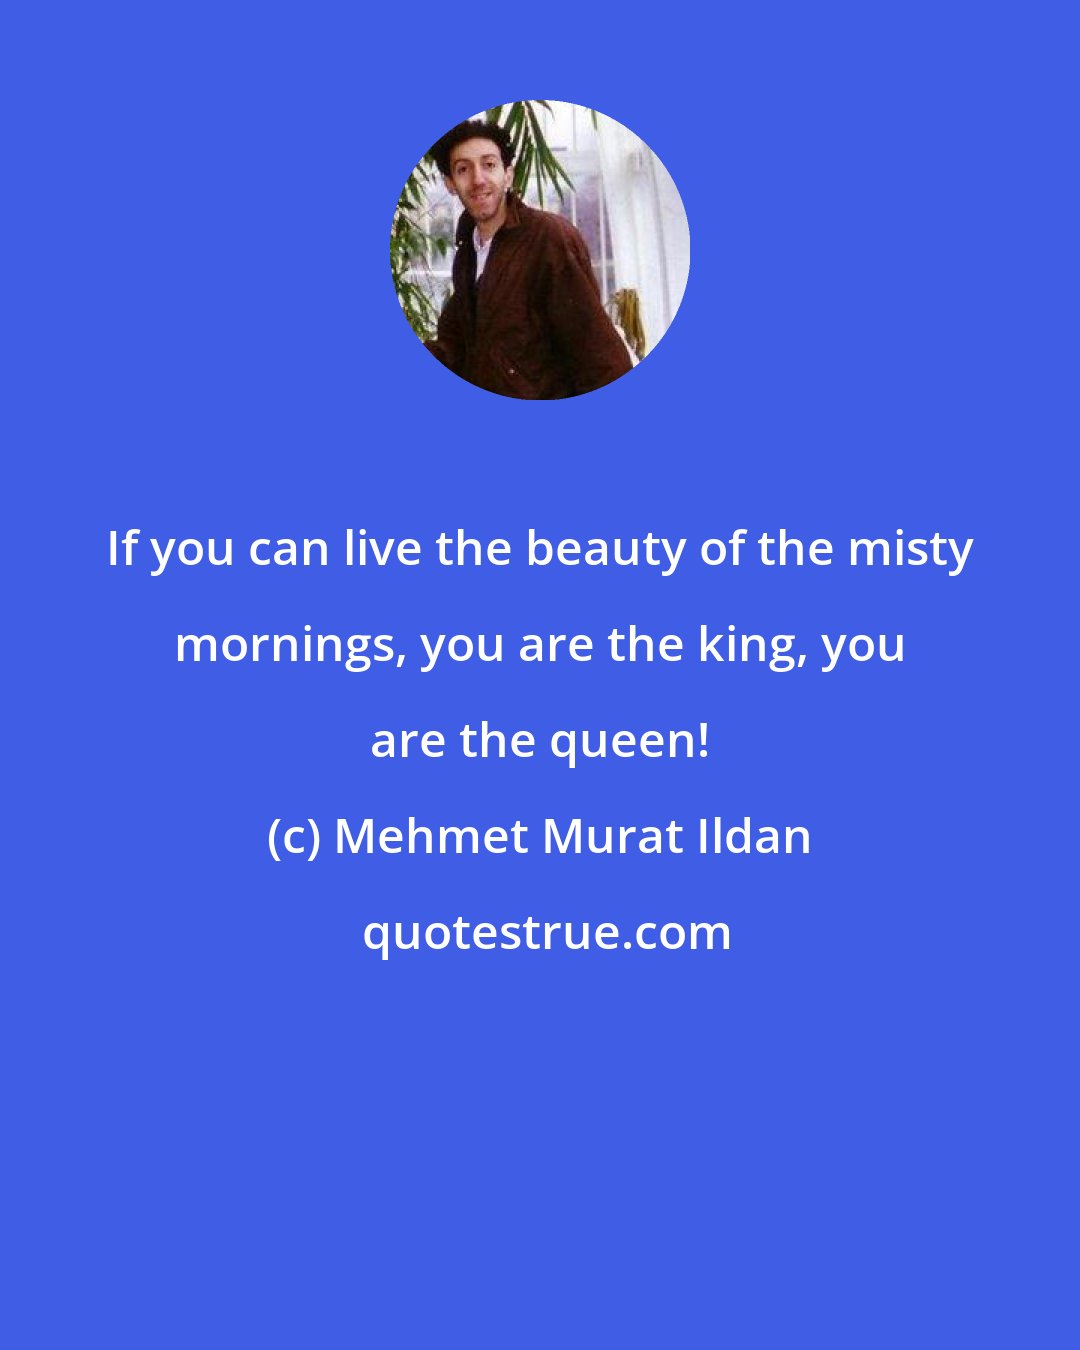 Mehmet Murat Ildan: If you can live the beauty of the misty mornings, you are the king, you are the queen!